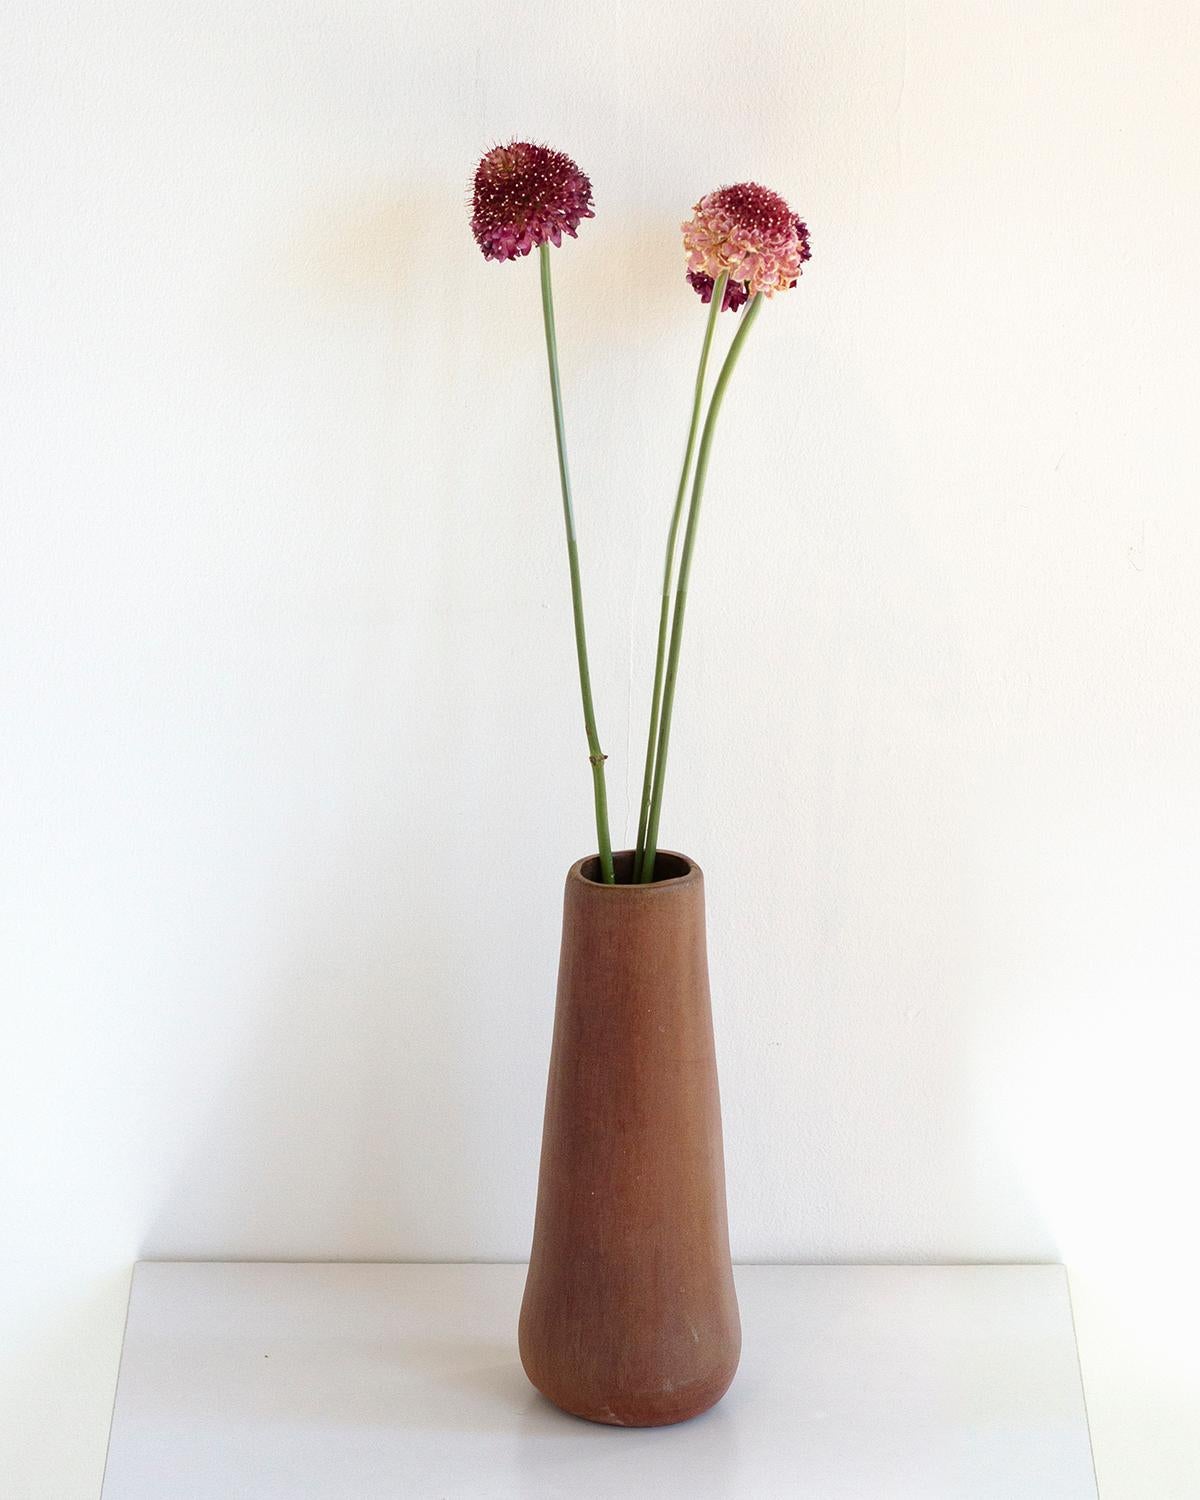 This Solitaire Clay Vase is crafted from toasted clay and is perfect for displaying flowers, branches, or other decorations in minimalist luxury. Its rustic brown hue adds to its quiet elegance, and it makes for an ideal holiday gift. Each piece is